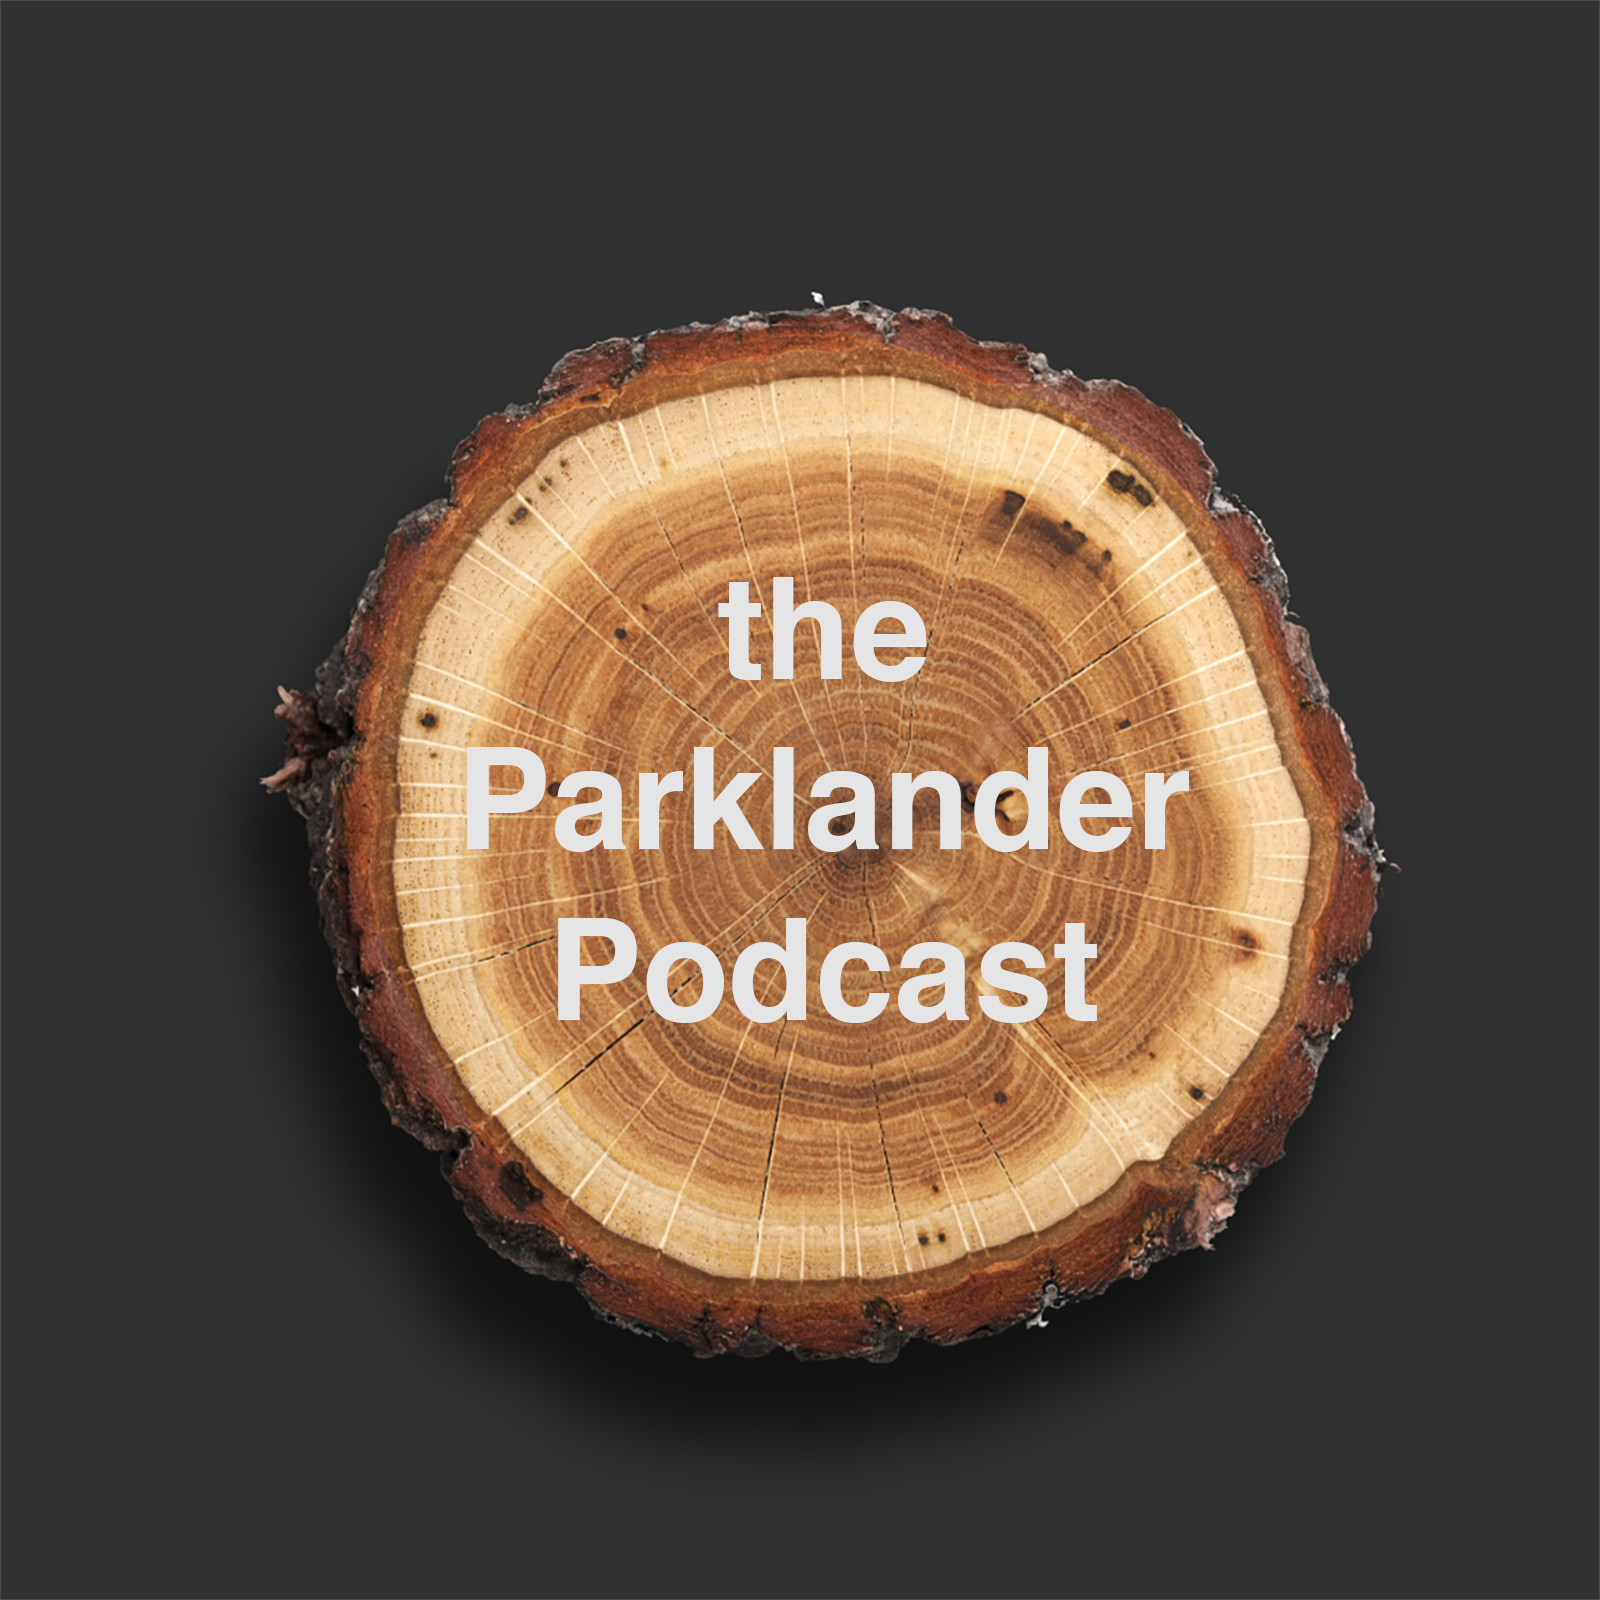 The Parklander Magazine - Connecting you to our community